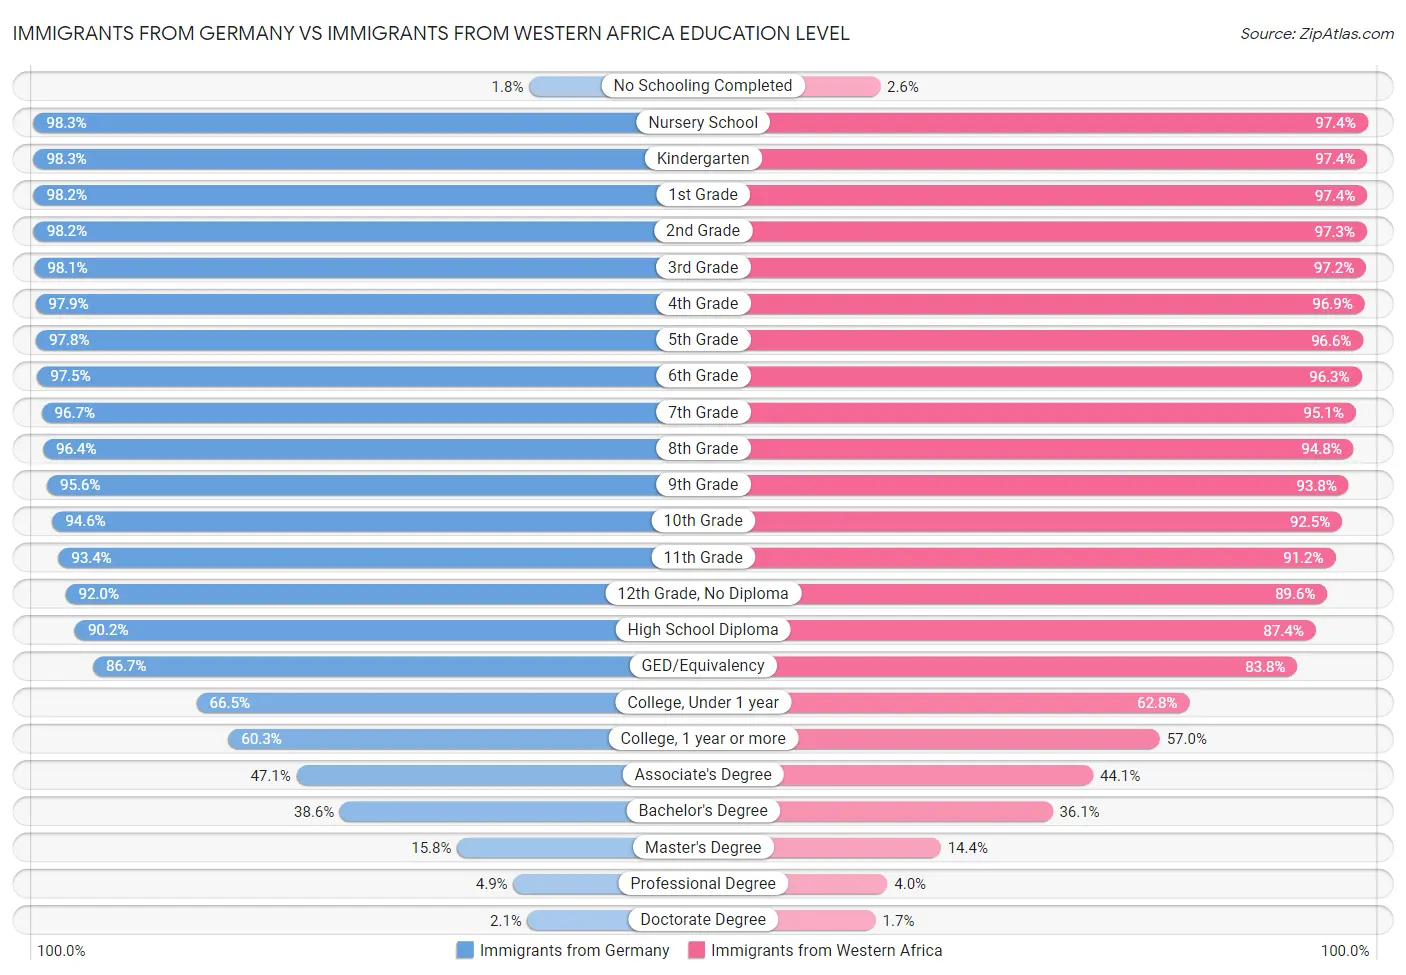 Immigrants from Germany vs Immigrants from Western Africa Education Level